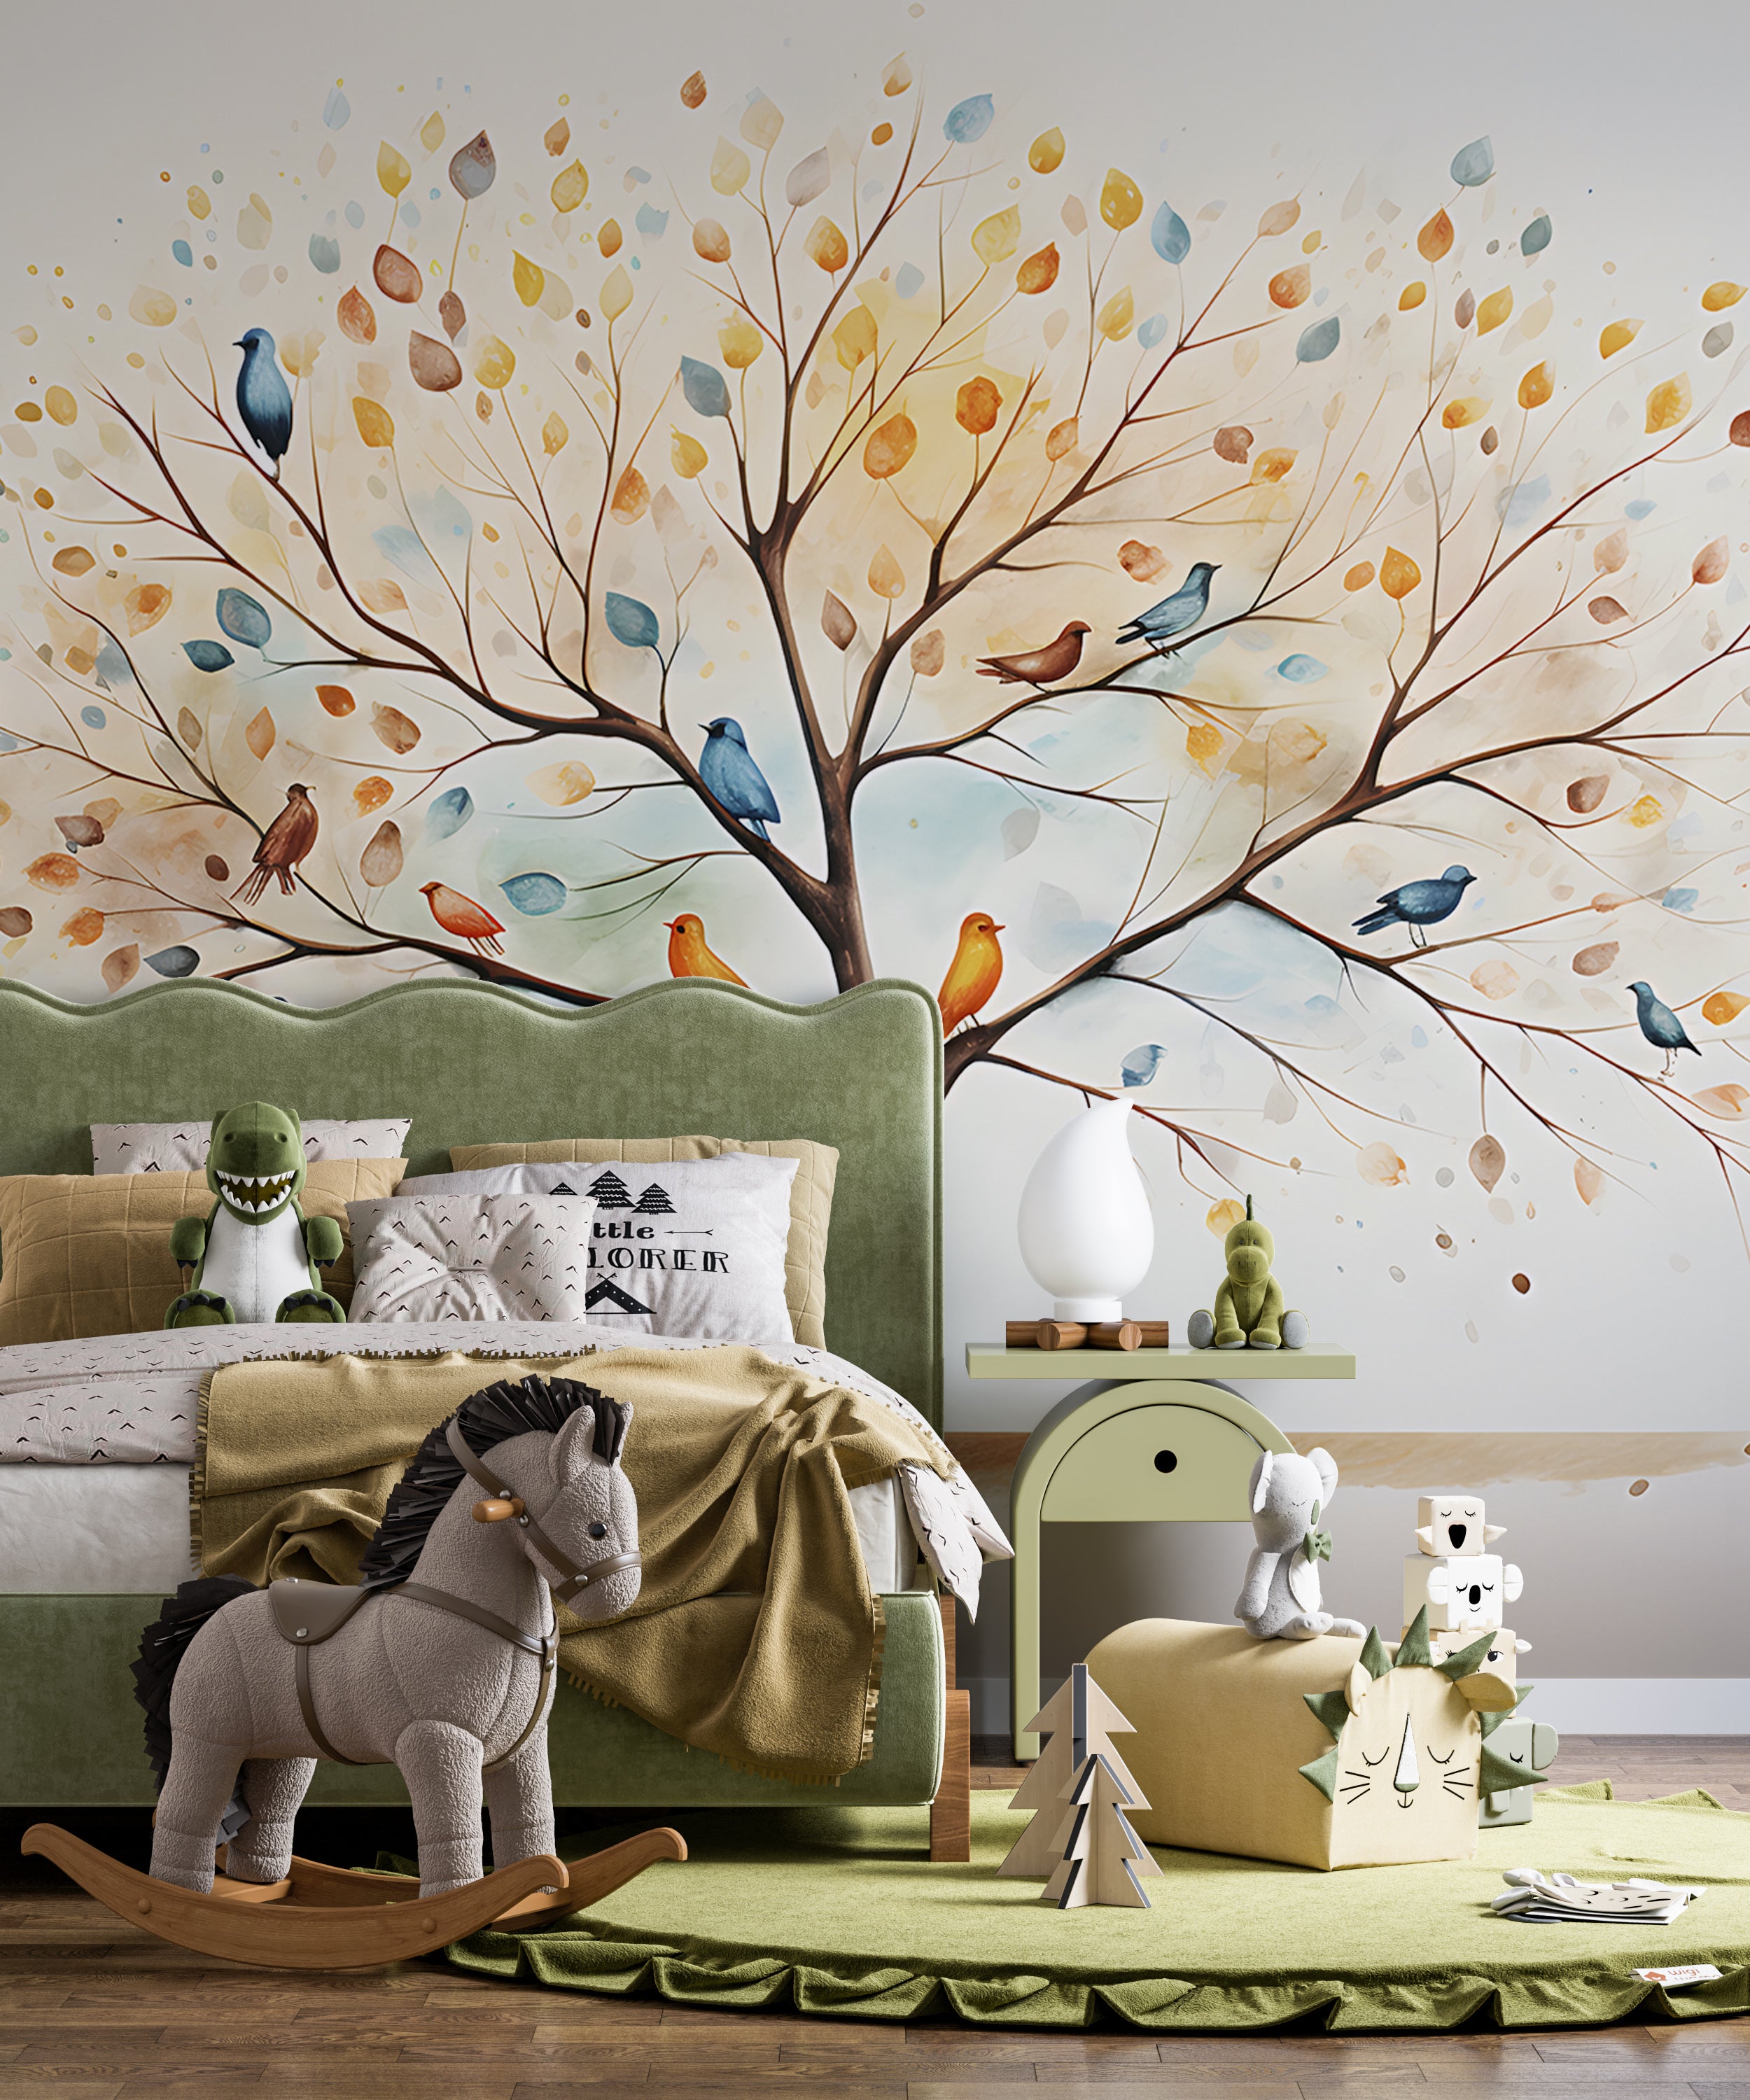 Whimsical Space with Nature Decor